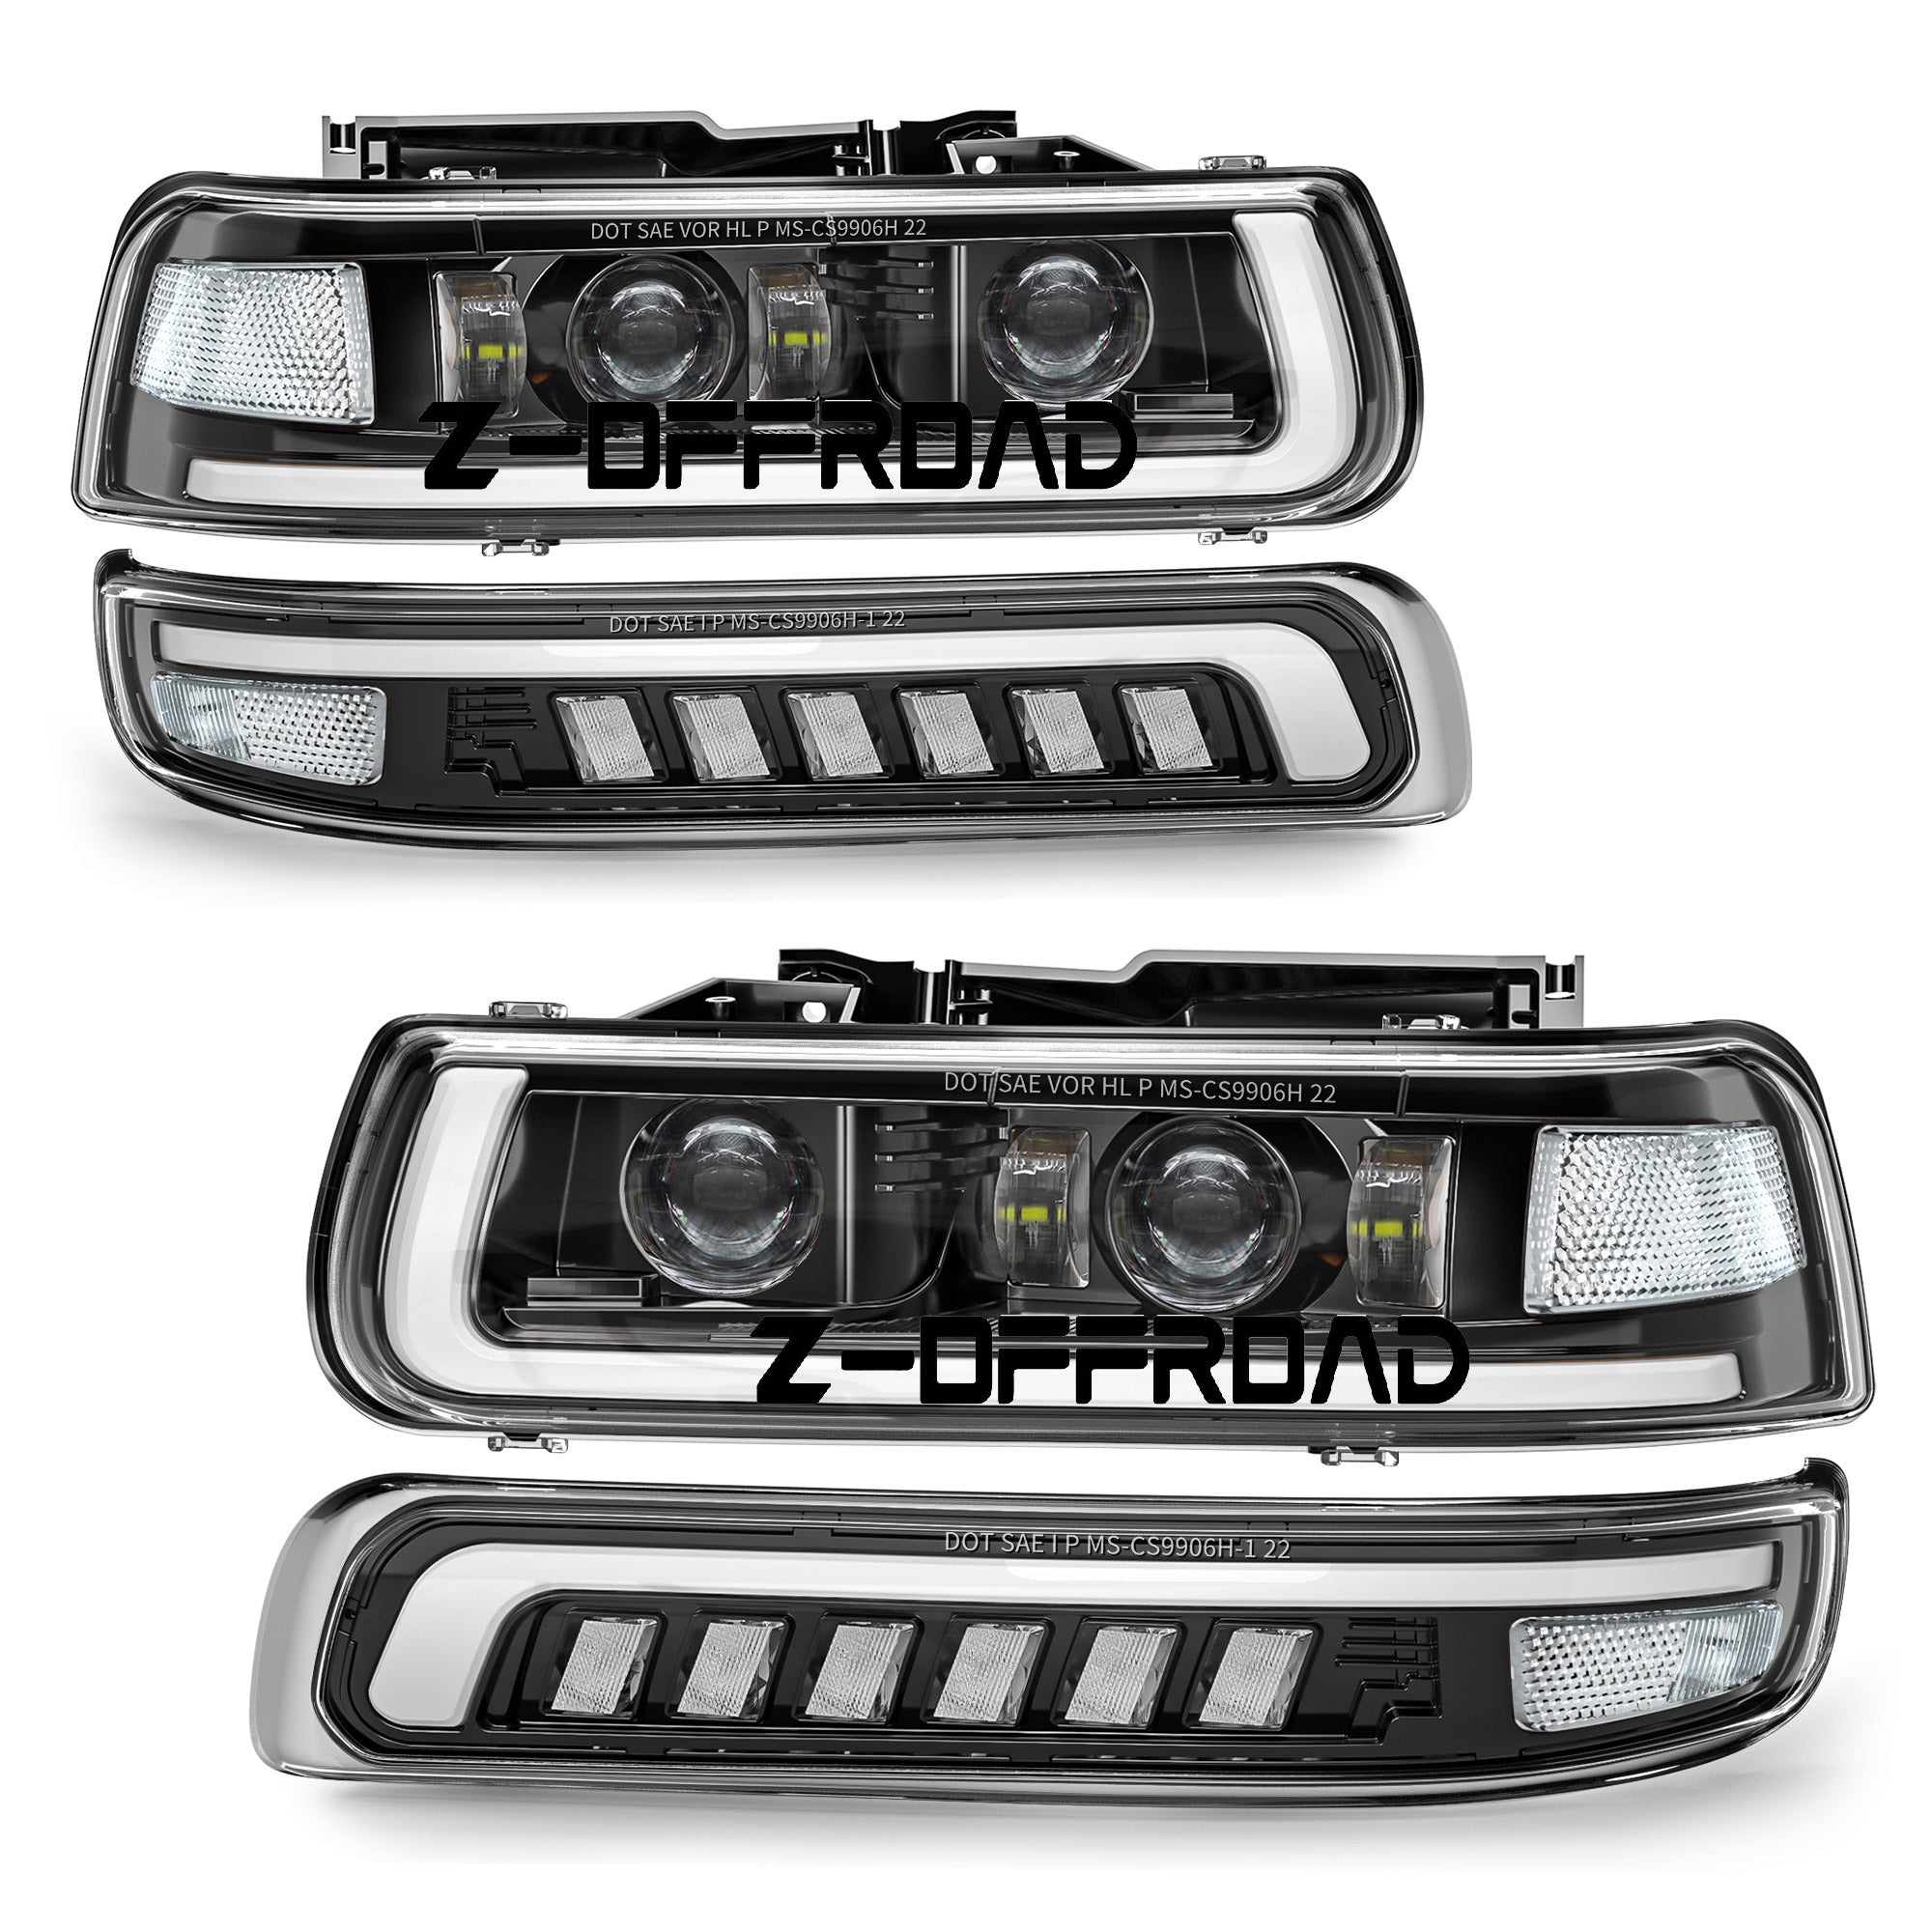 3rd Gen LED Replacement for 99'-06' Chevy Silverado Suburban Tahoe